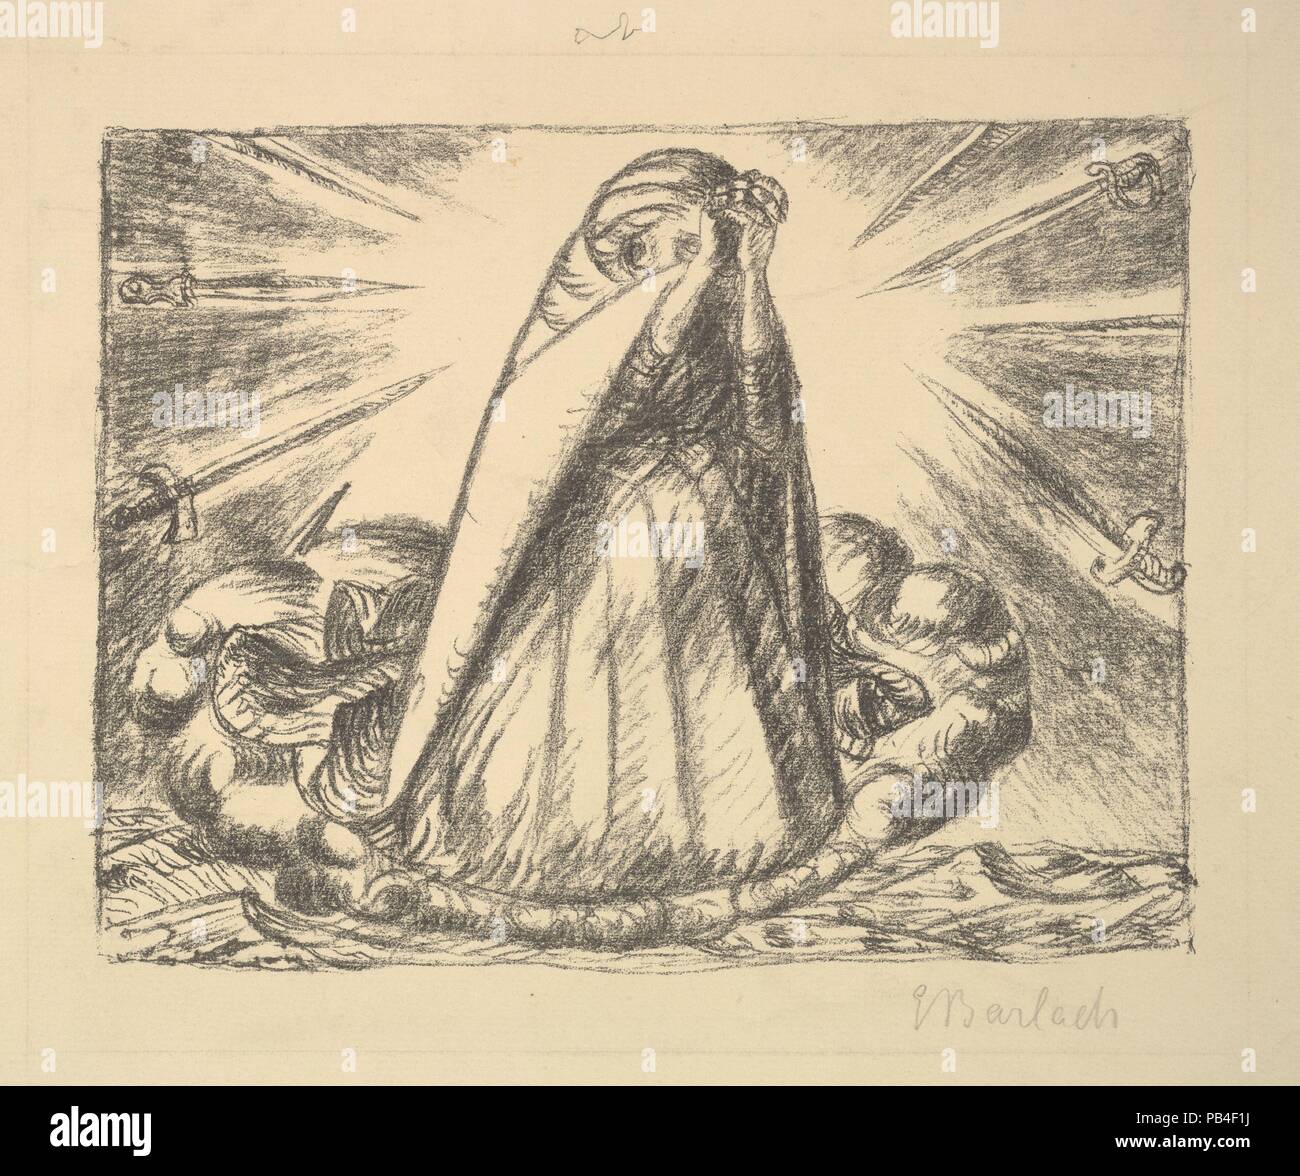 Dona Nobis Pacem!  [Give Us Peace!]. Artist: Ernst Barlach (German, Wedel 1870-1938 Rostock). Dimensions: image: 7 x 9 1/8 inches (17.8 x 23.2 cm). Printer: Pan-Presse, Berlin. Publisher: Paul Cassirer. Series/Portfolio: Der Bildermann, Nr. 18 vom 20 December 1916. Date: 1916.  Barlach's call for peace was published on the cover of the December 1916 issue of the art journal Der Bildermann (The Picture Man). The image shows a mournful Madonna with hands clutched in a prayer for peace; the seven swords symbolize her sorrows as well as those inflected by the war, making her representative of all  Stock Photo